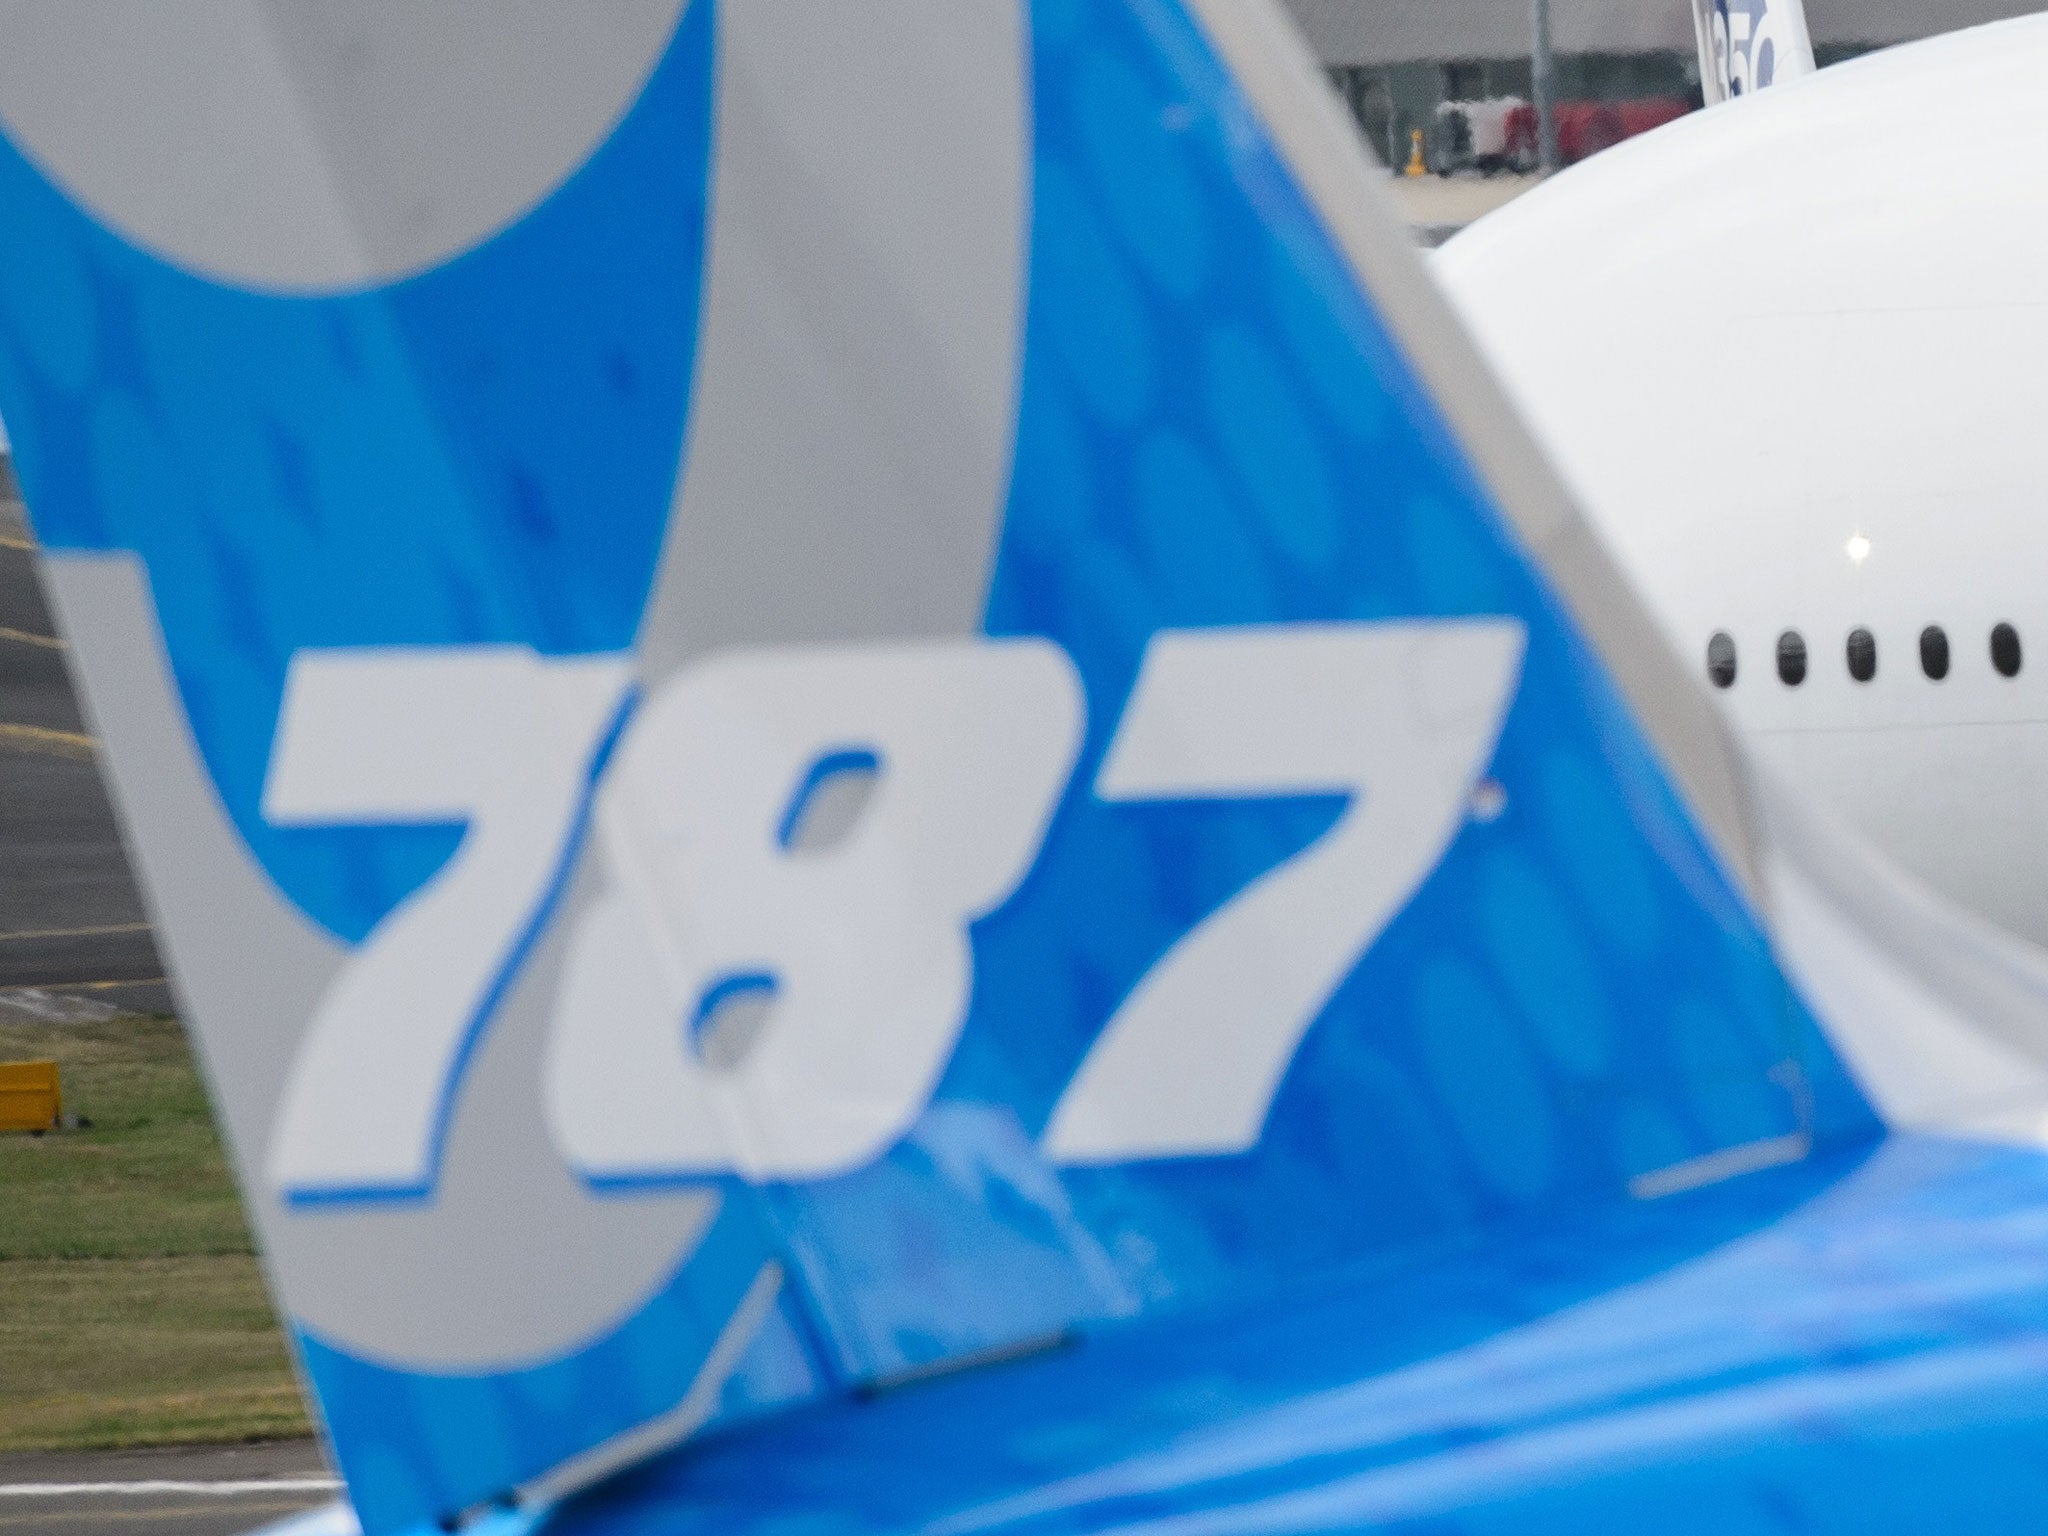 Executives at the Civil Aviation Authority, which is the British regulator, were concerned that this was an “unusual incident”, and questioned whether engine manufacturers were managing their risks properly